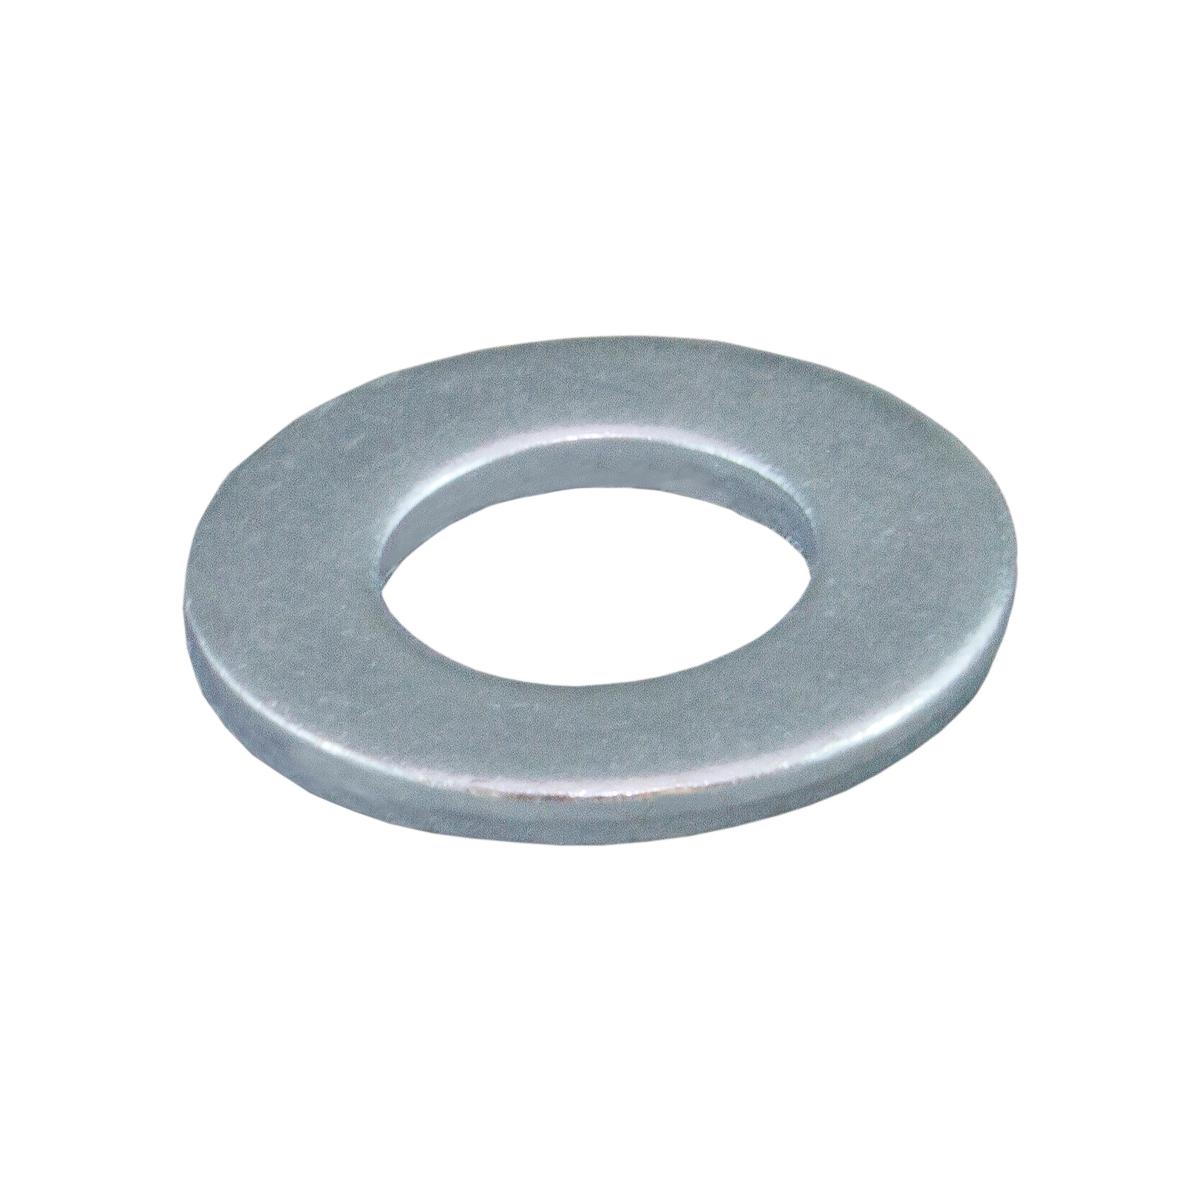 FLAT WASHER M6 STAINLESS STEEL